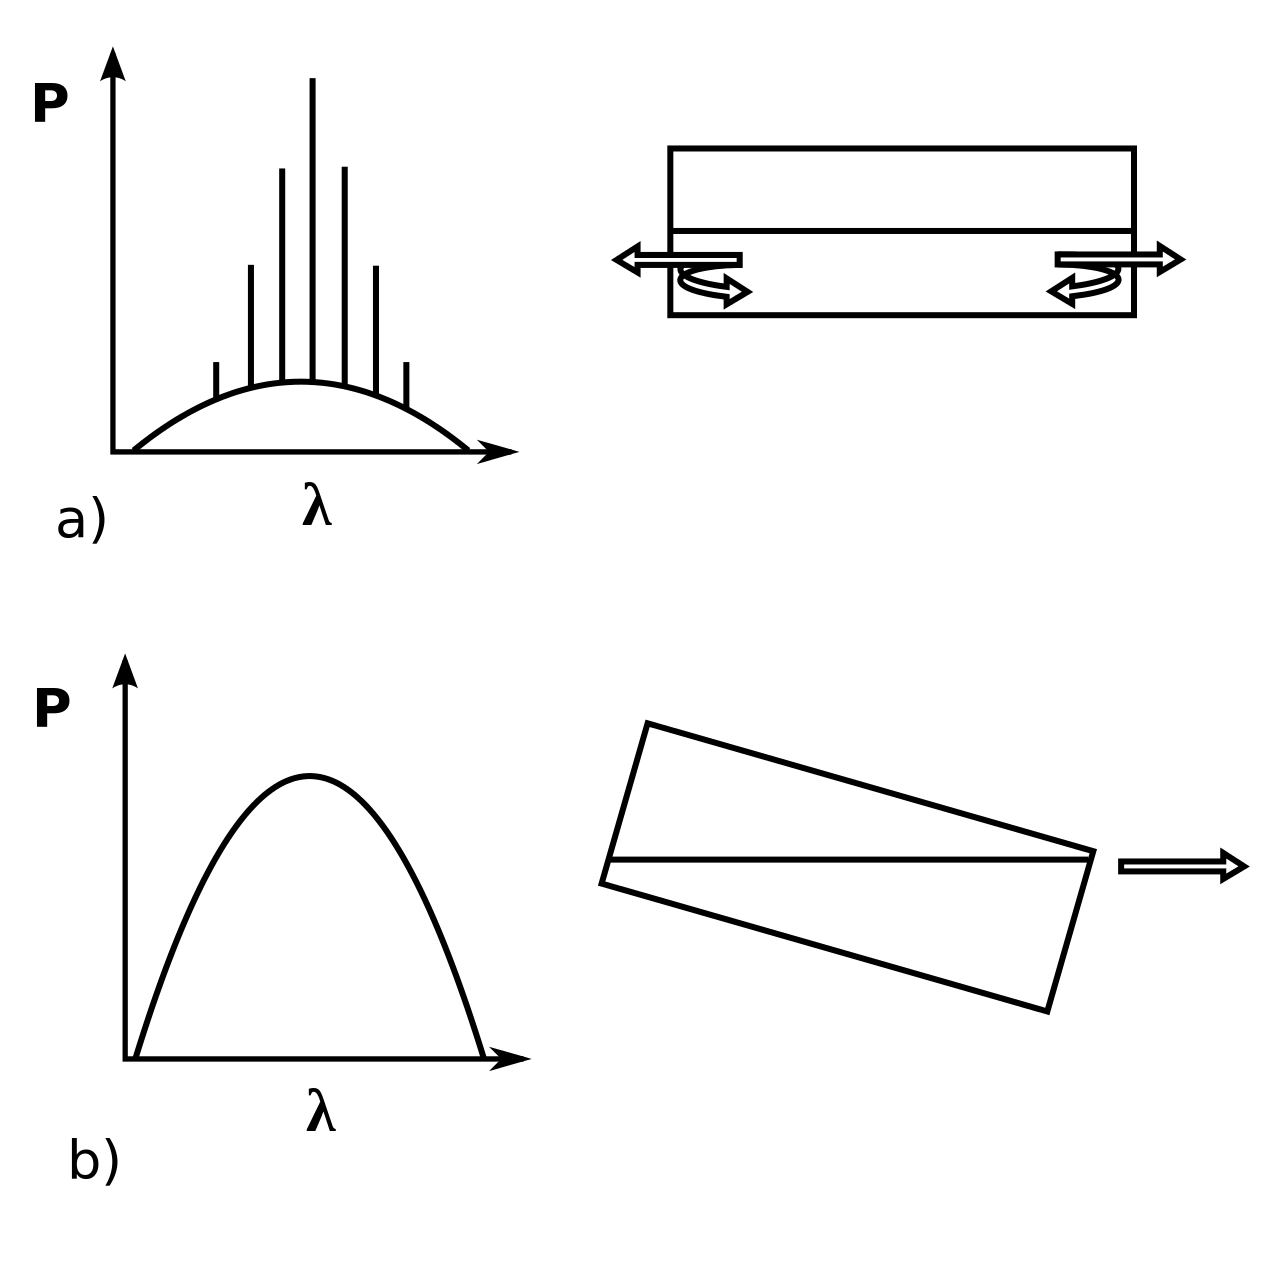 Image SLD SLED Superluminescent Laser Diode Angled Facet Diagram Wikipedia